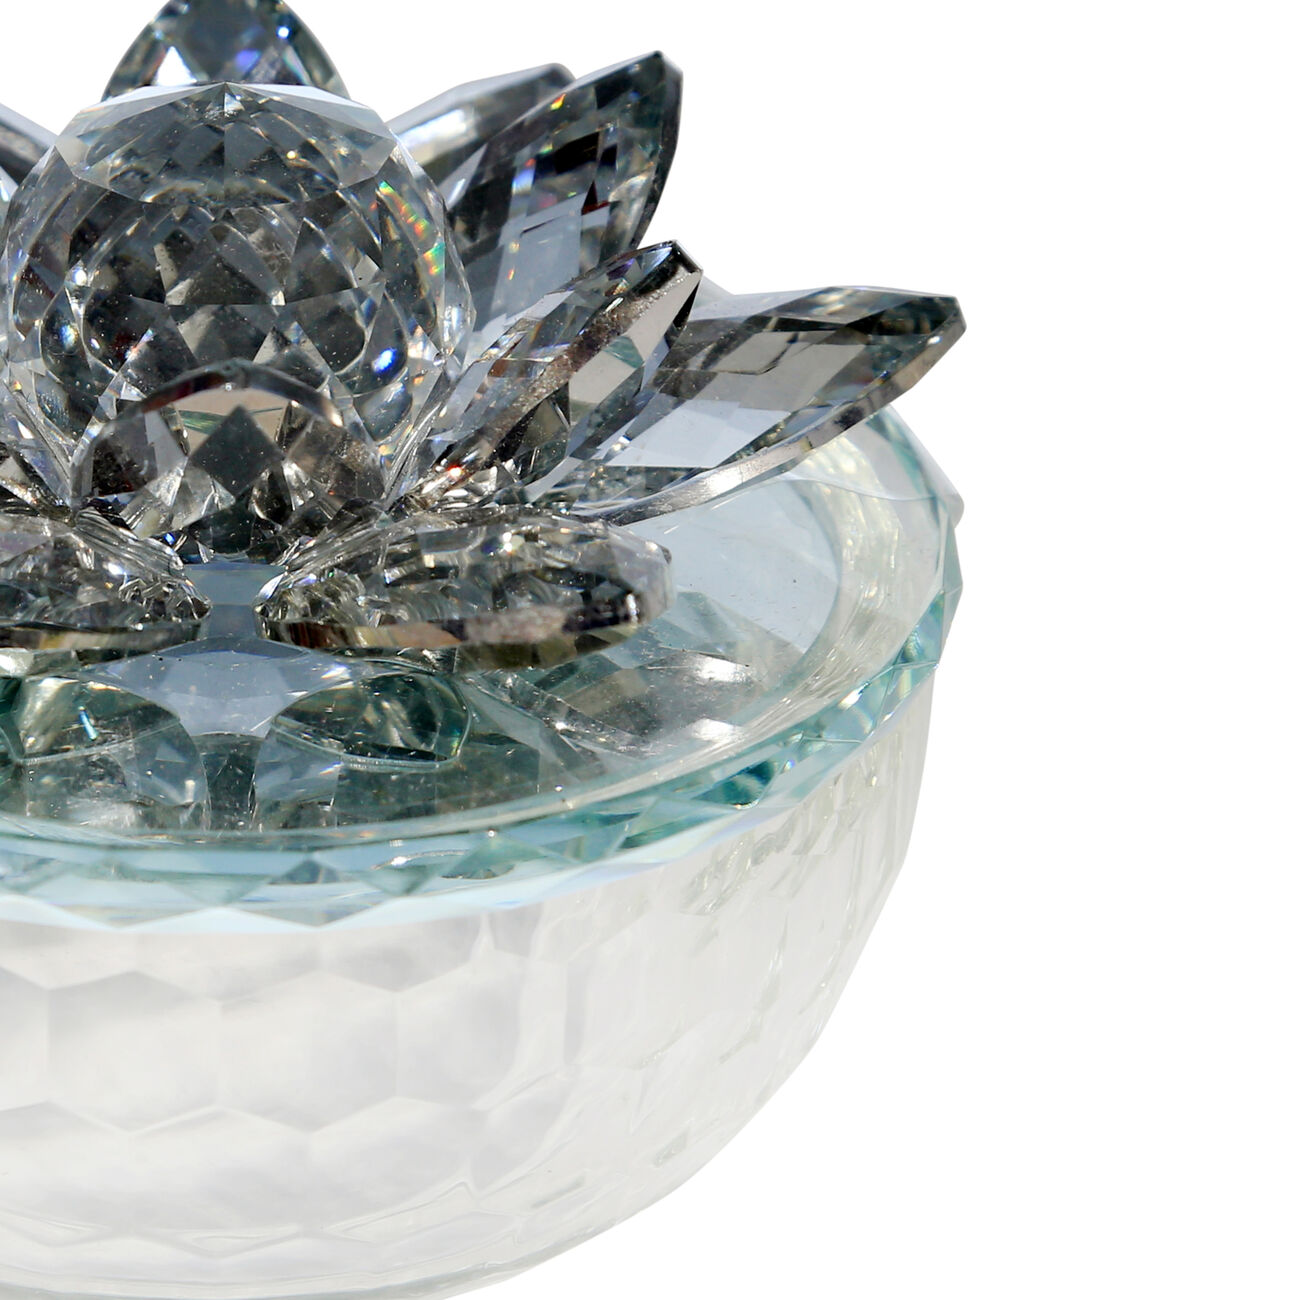 Glass Trinket Jar Accented with Crystal Lotus Flower, White and Black